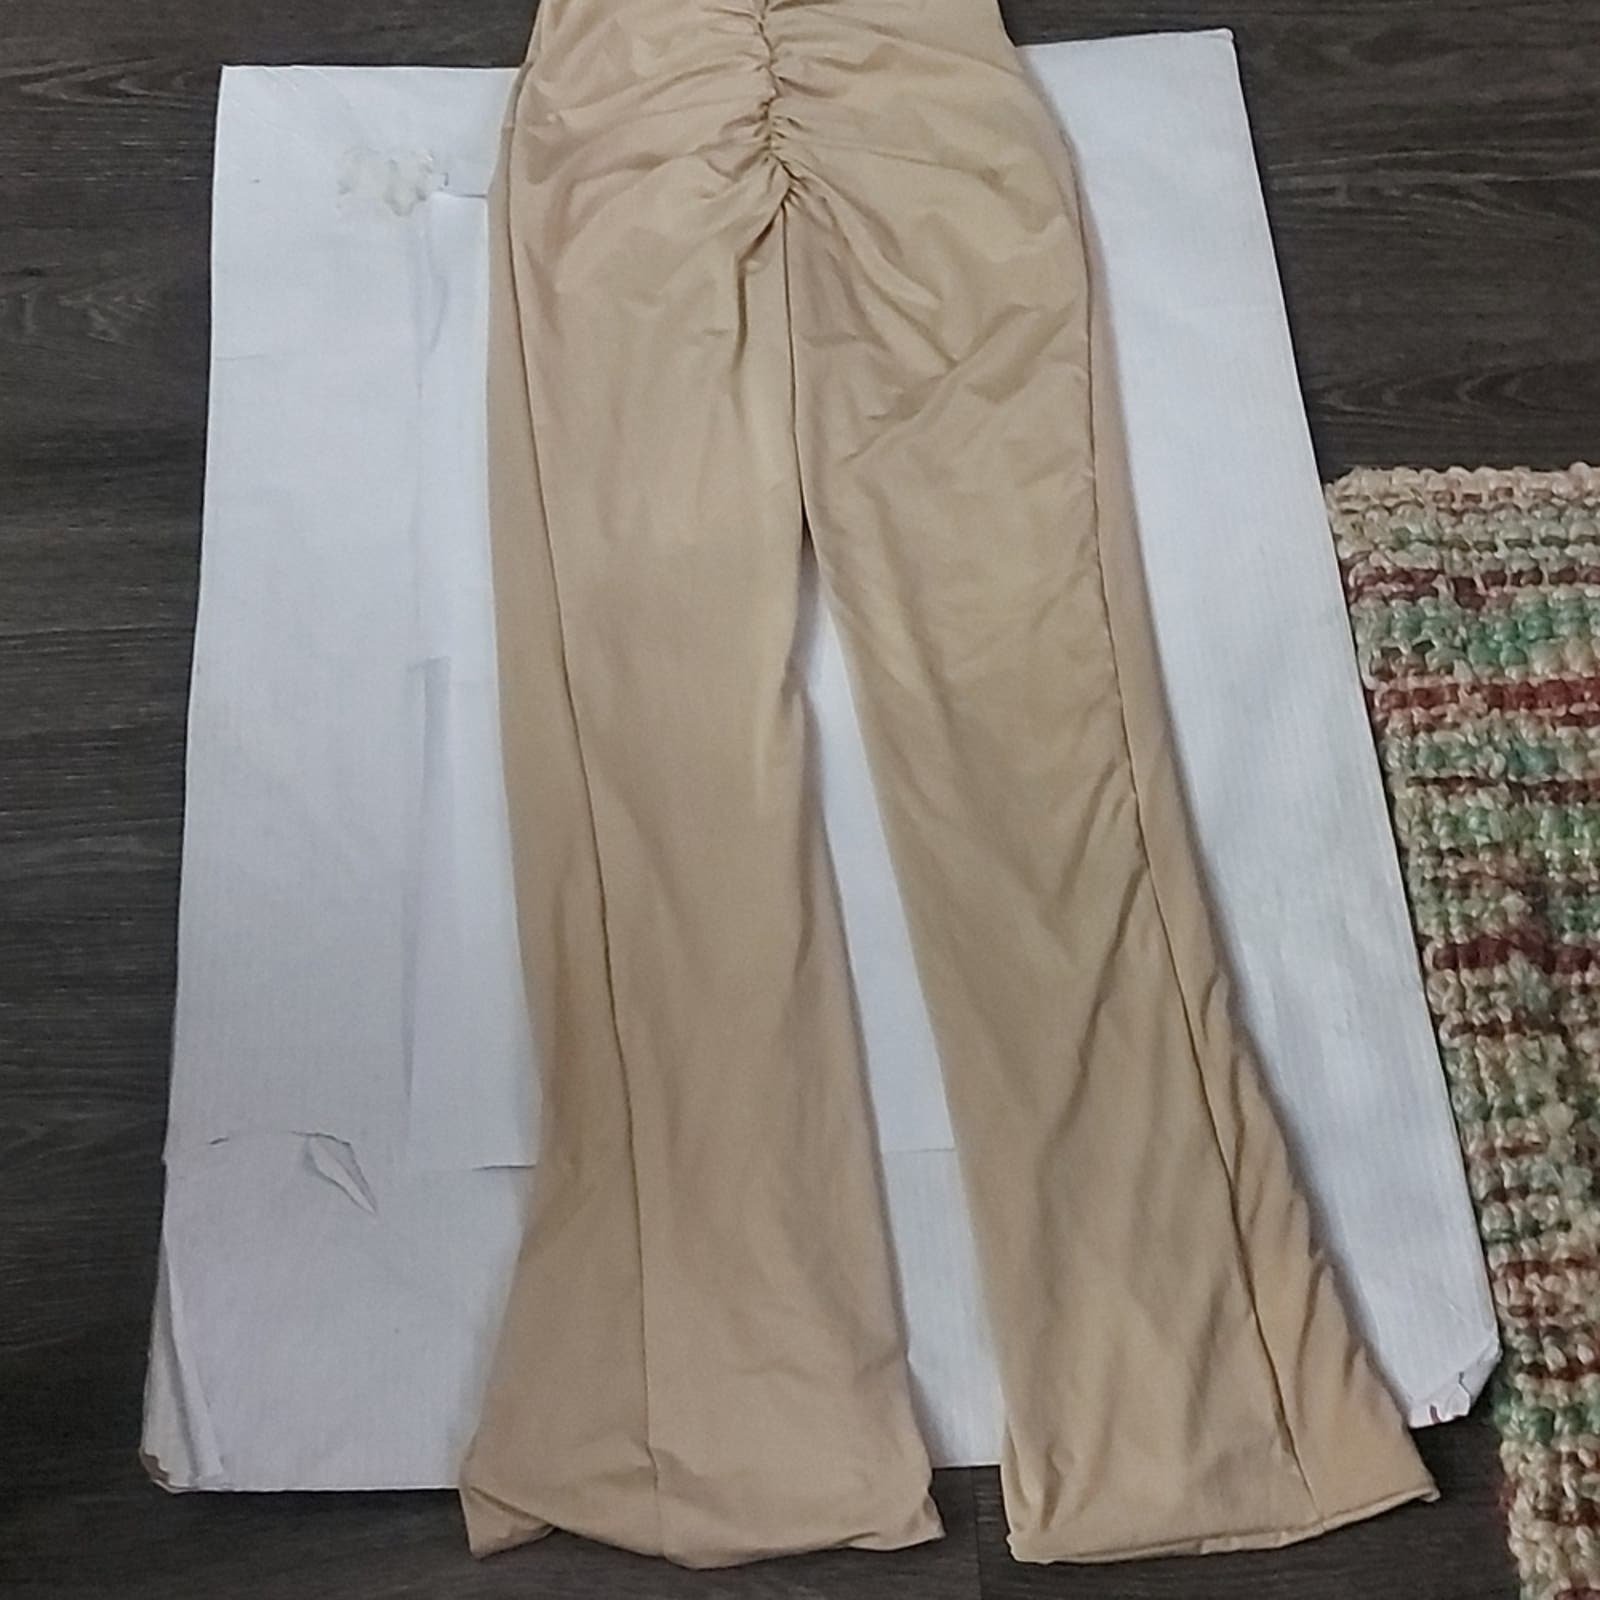 High quality PrettyLittleThing Shape Stone Flared Slinky Trouser Size 6 hAlC90bnk just for you